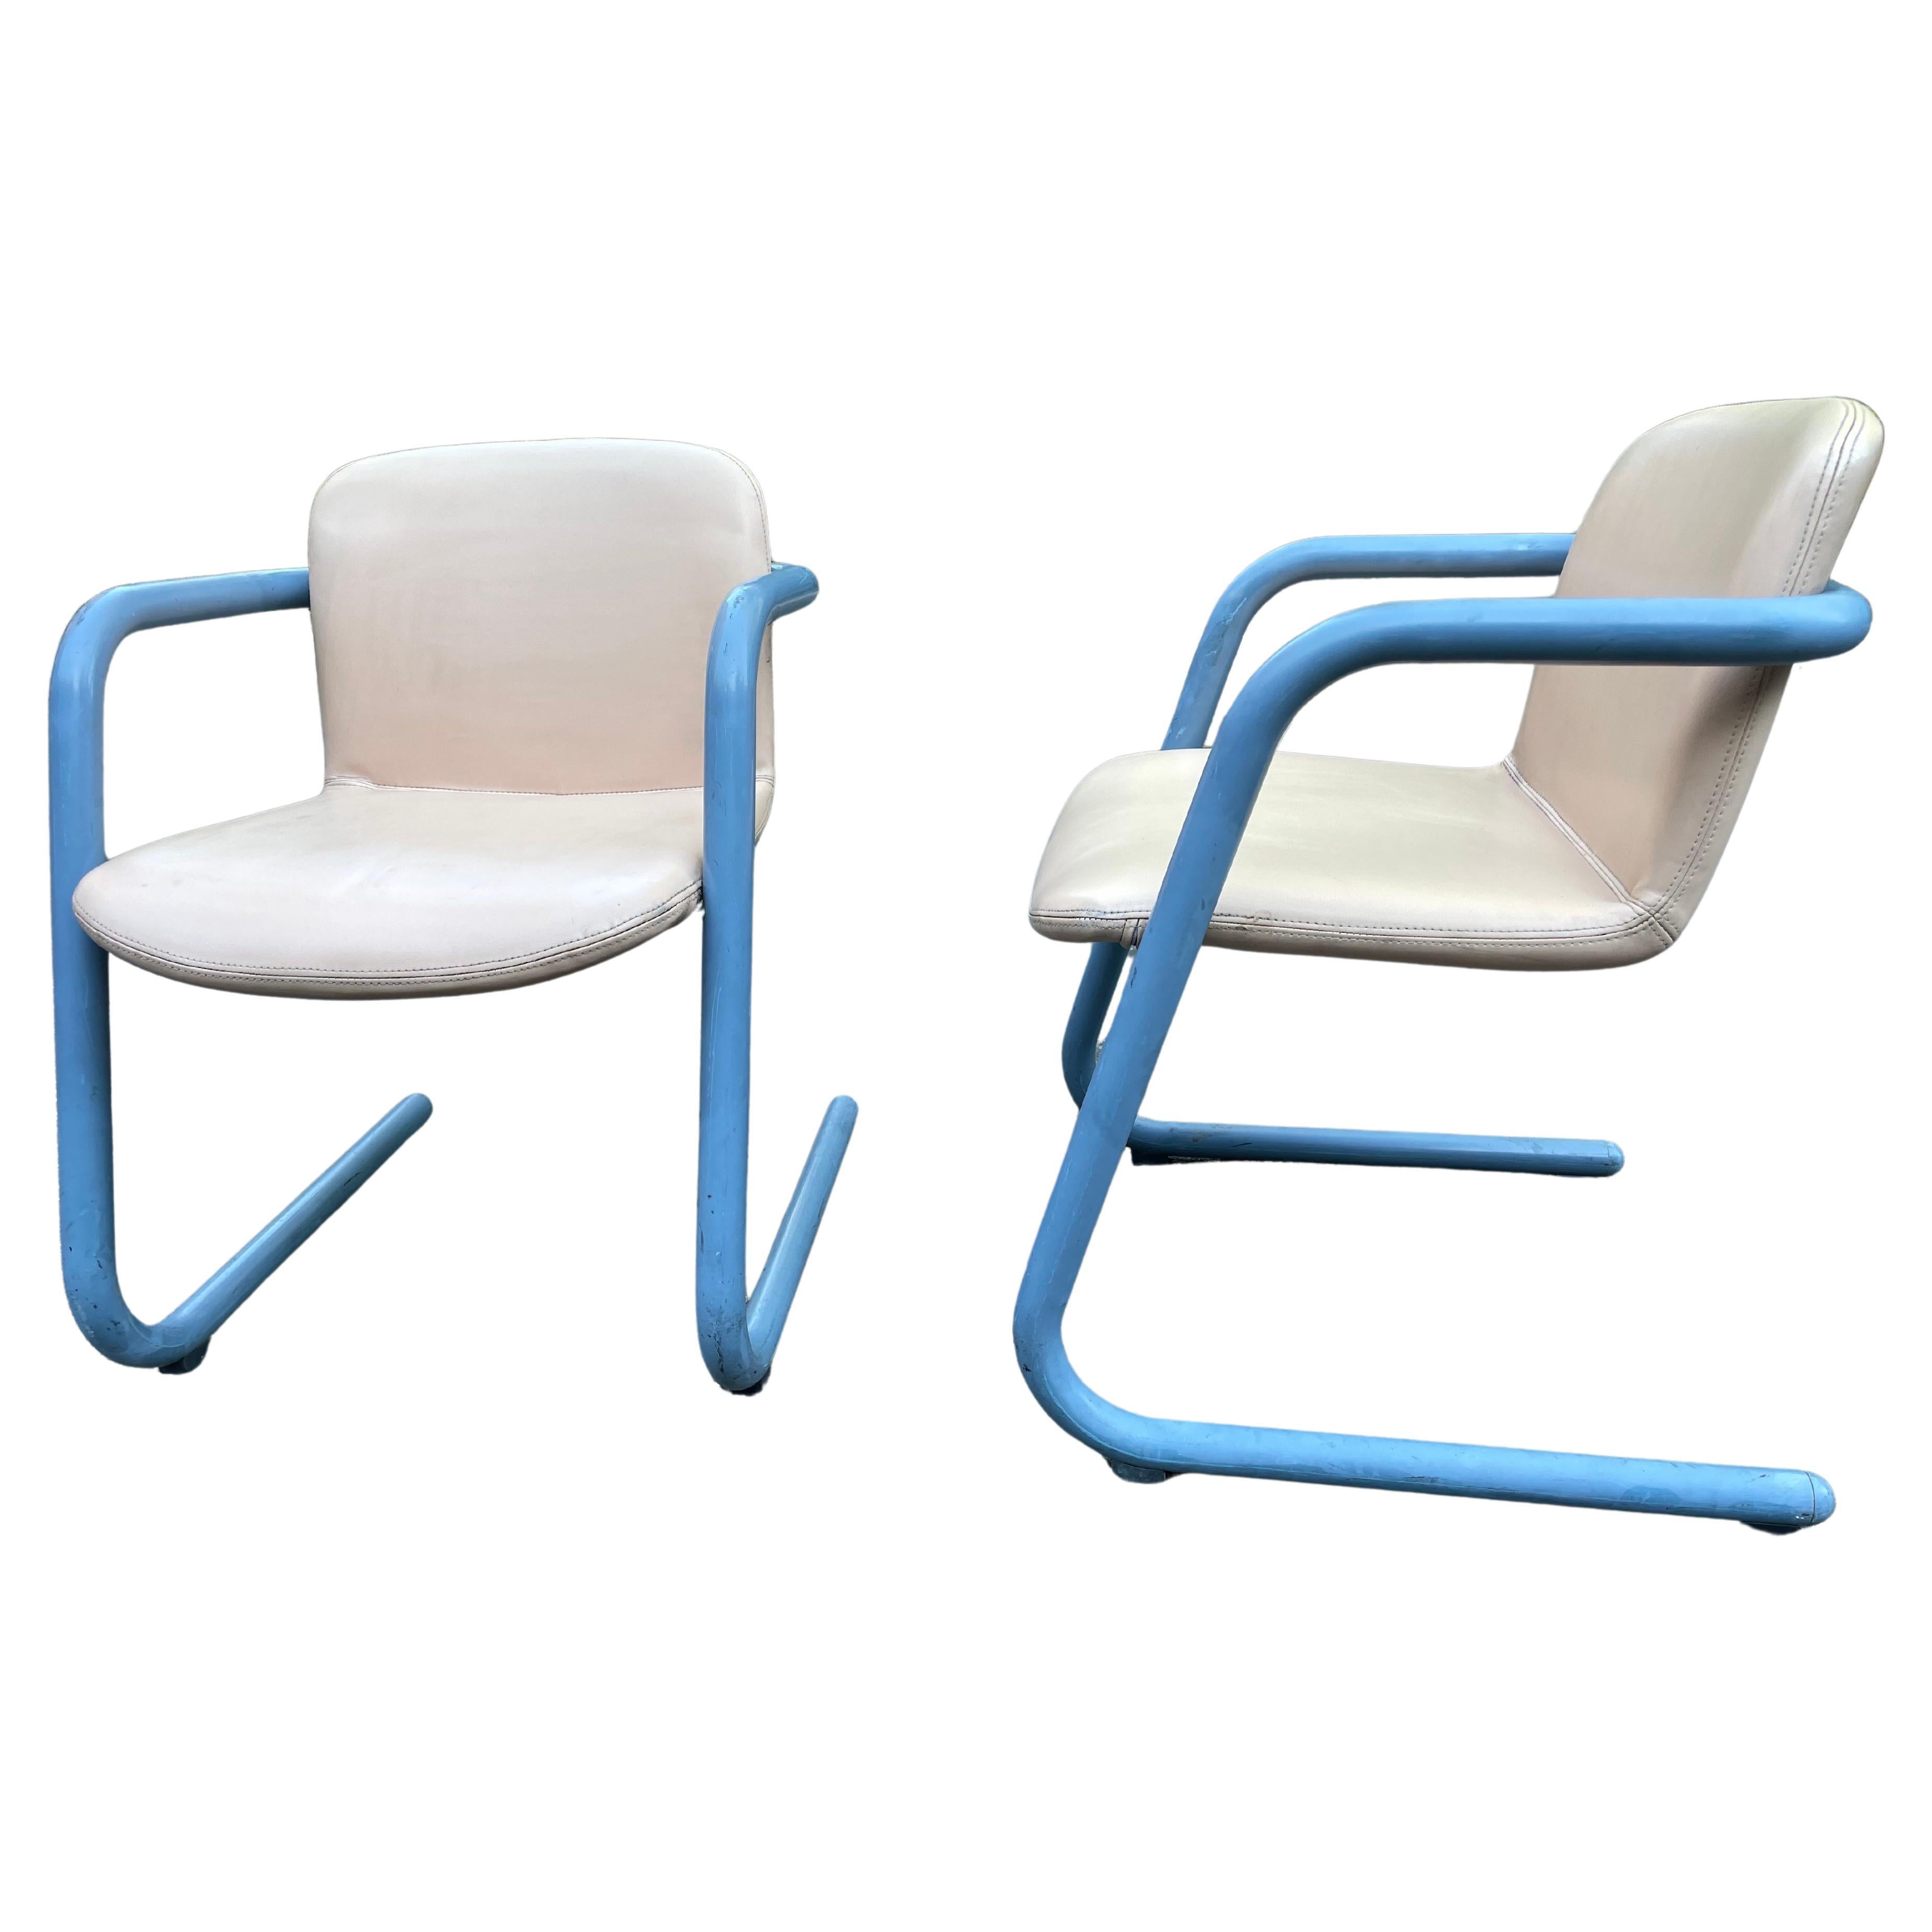 Canadian Mid-Century Kinetics Blue 100/300 Chairs by Salmon & Hamilton - Set of 2 For Sale